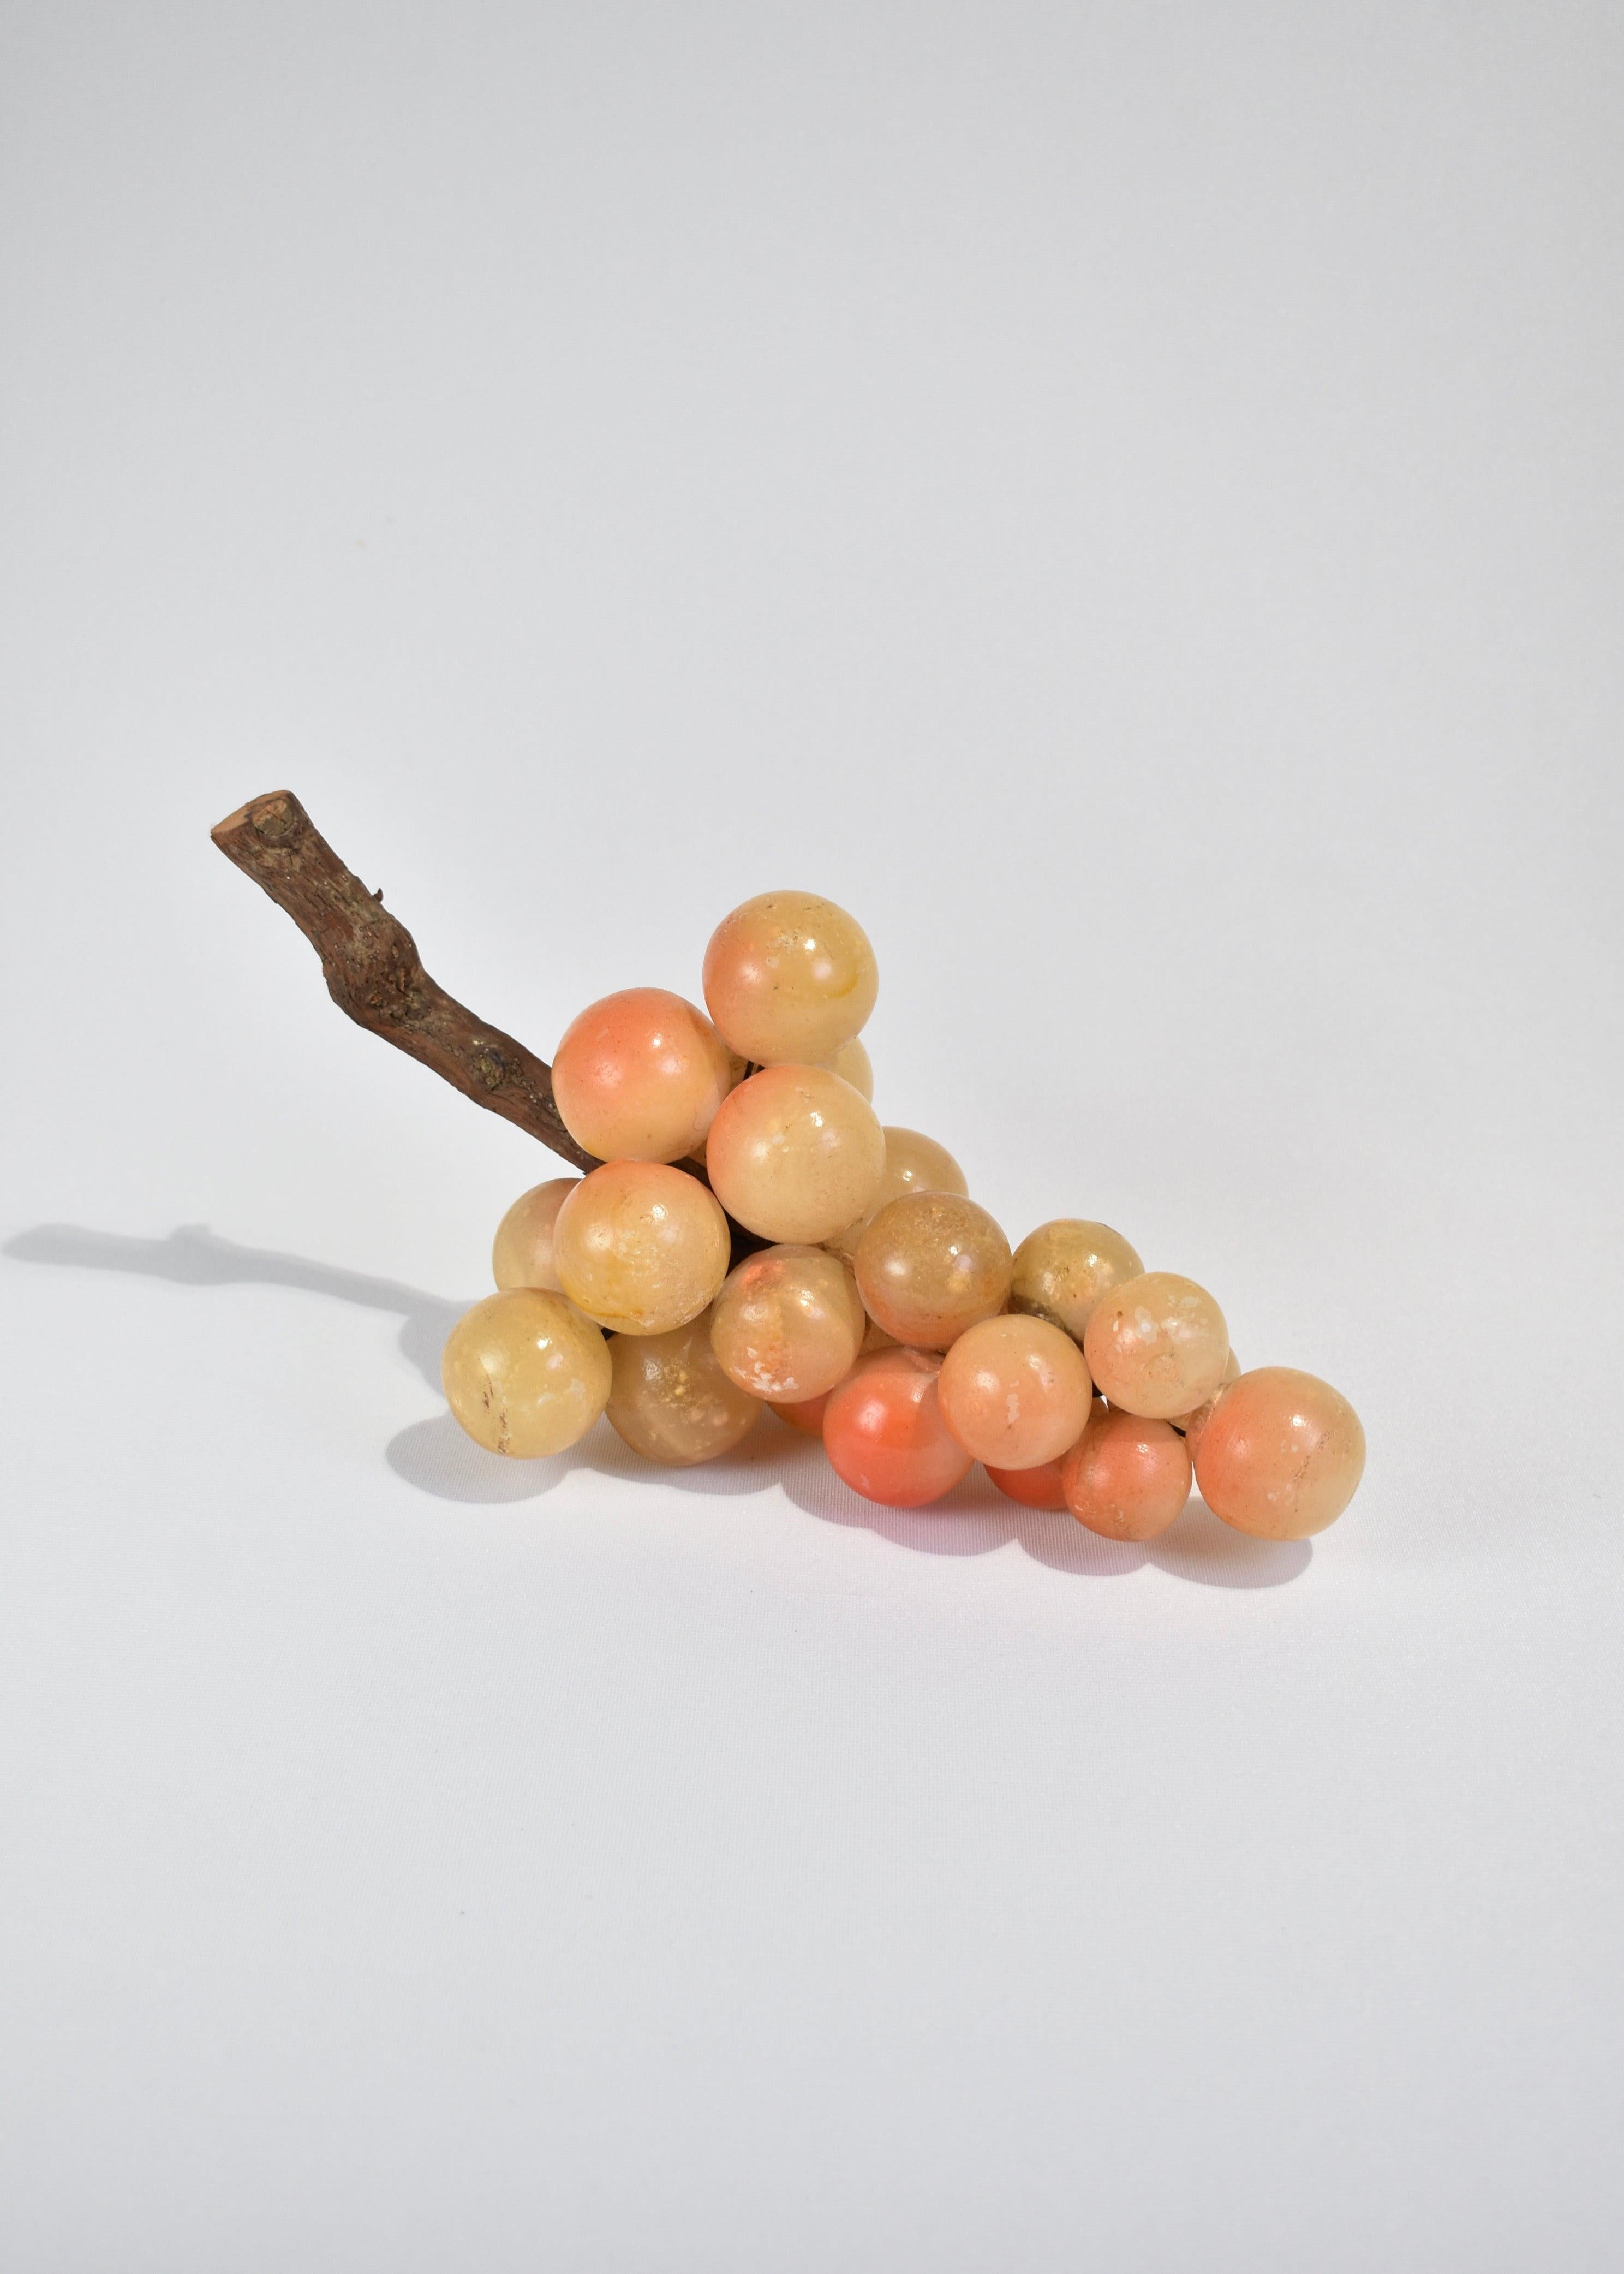 Vintage, yellow alabaster grape sculpture with orange accents and wooden stem; a beautiful coffee table accent piece. Made in Italy.